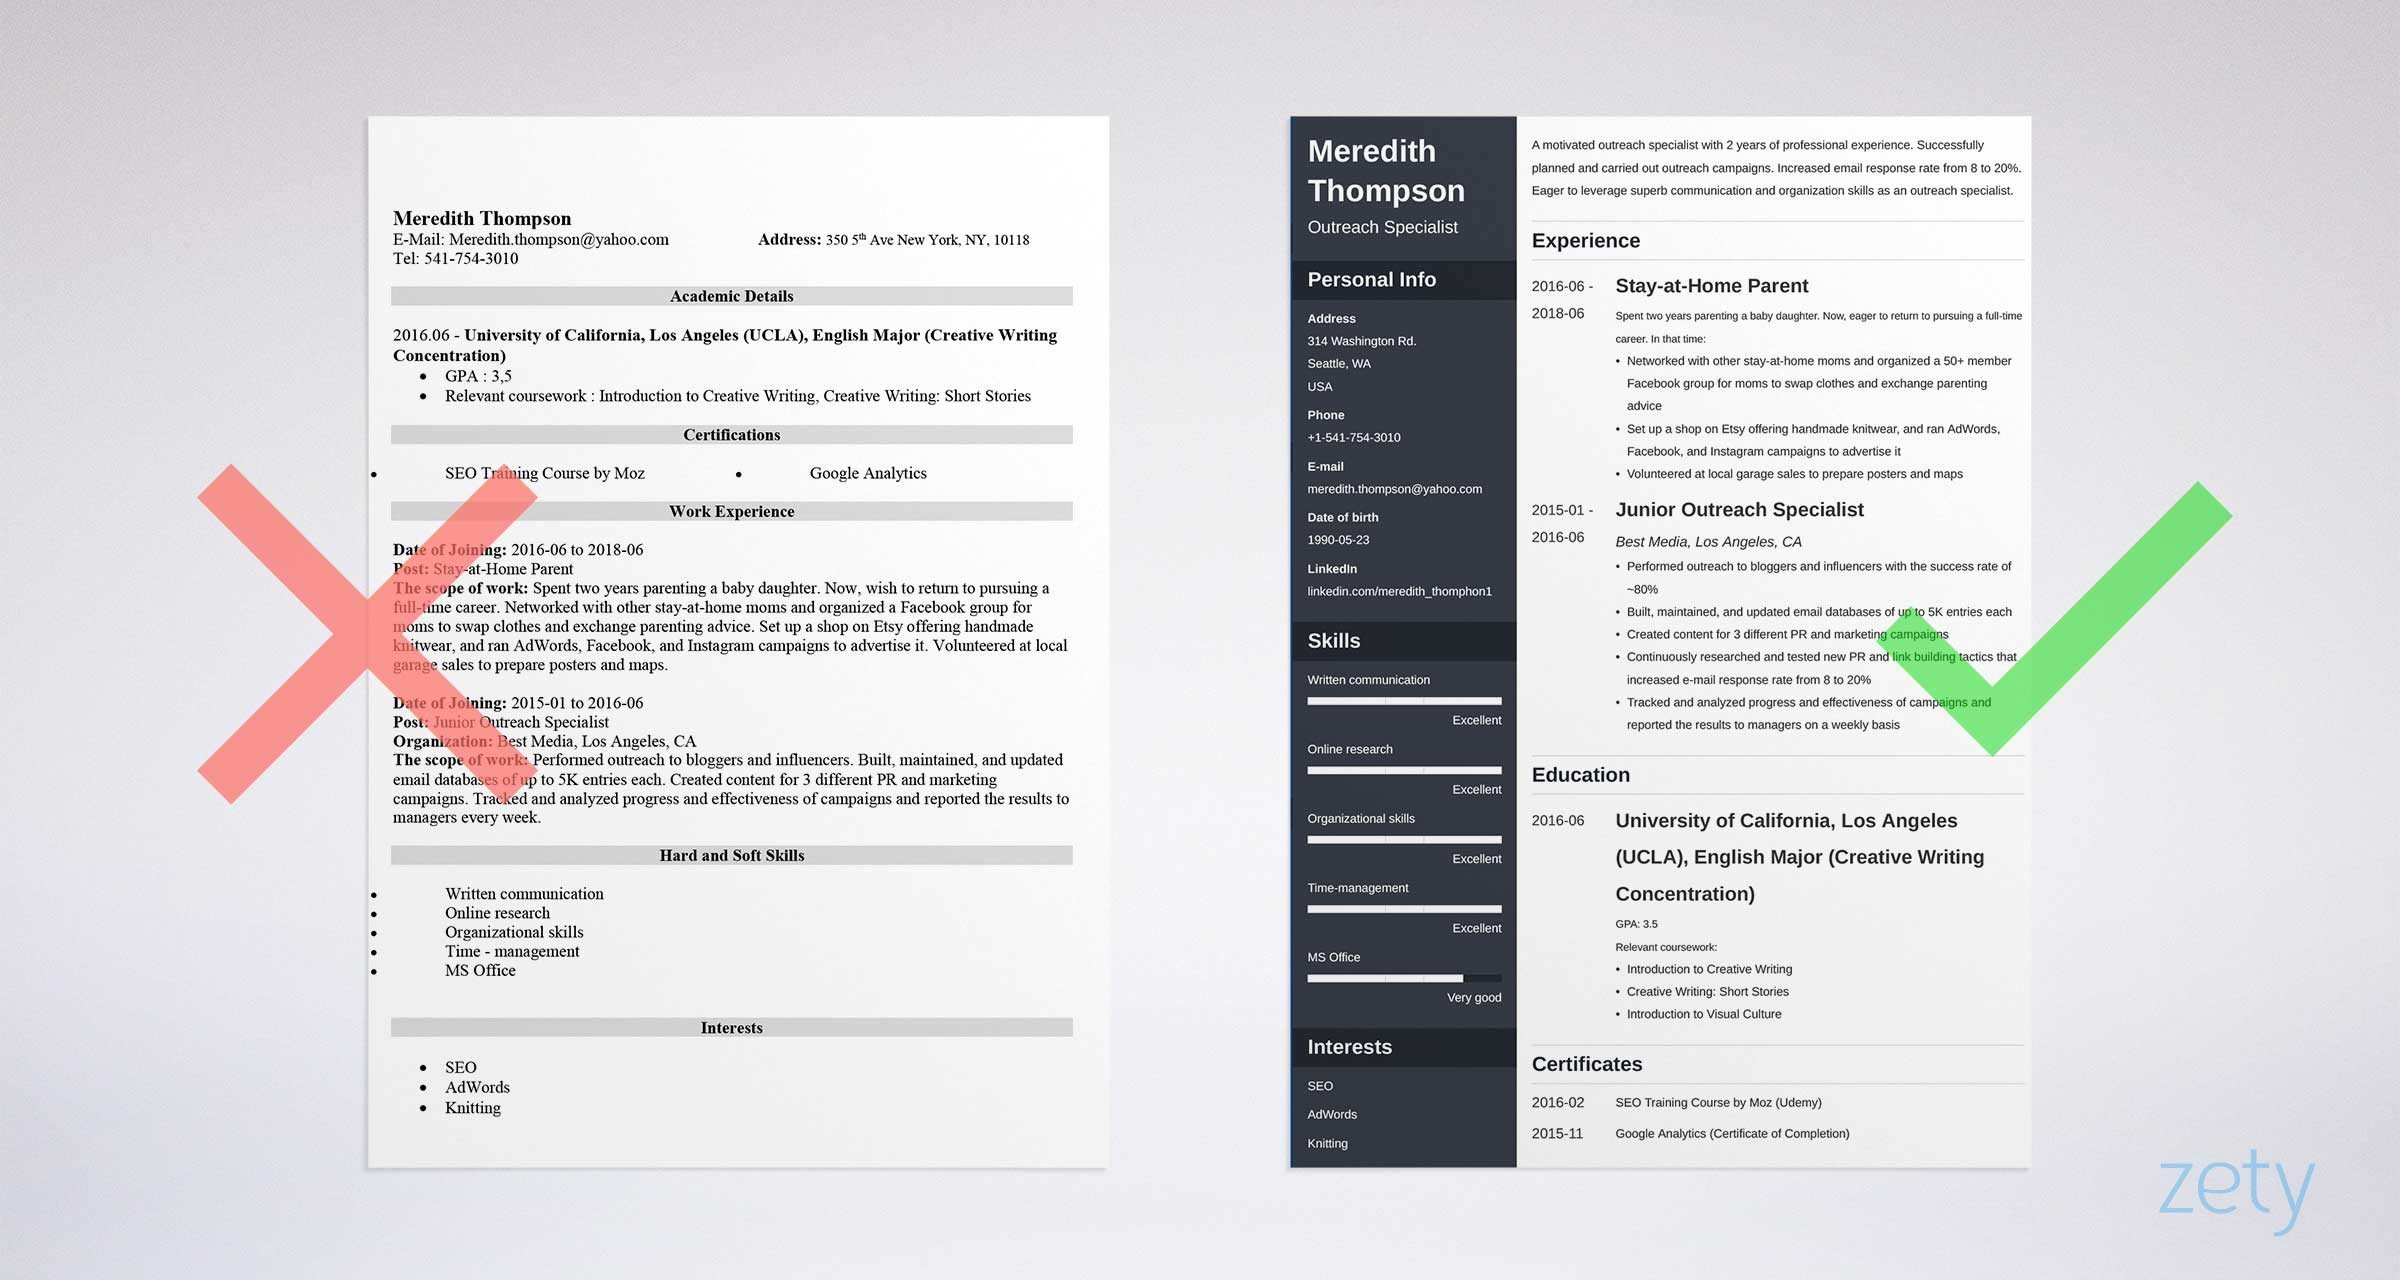 Resume Templates for Mums Returning to Work Stay at Home Mom Resume Example & Job Description Tips